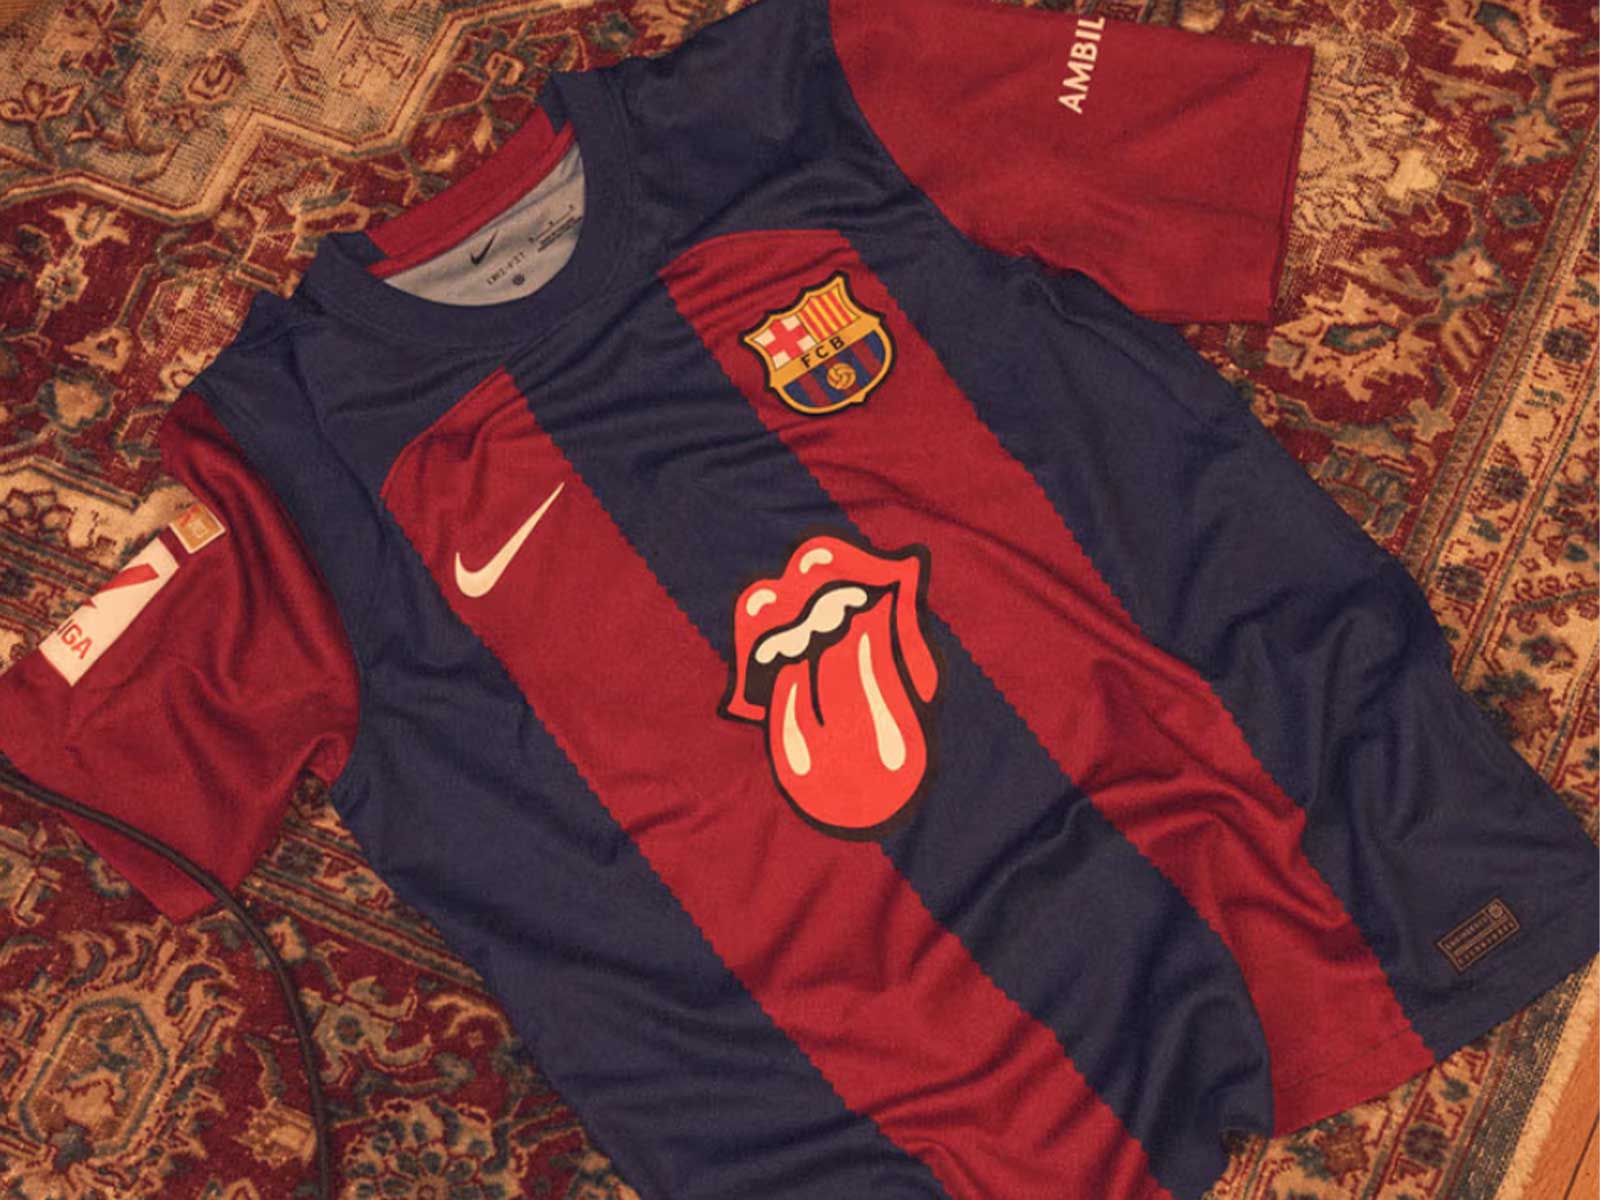 Barcelona to wear Rolling Stones shirt for El Clasico match against Real  Madrid